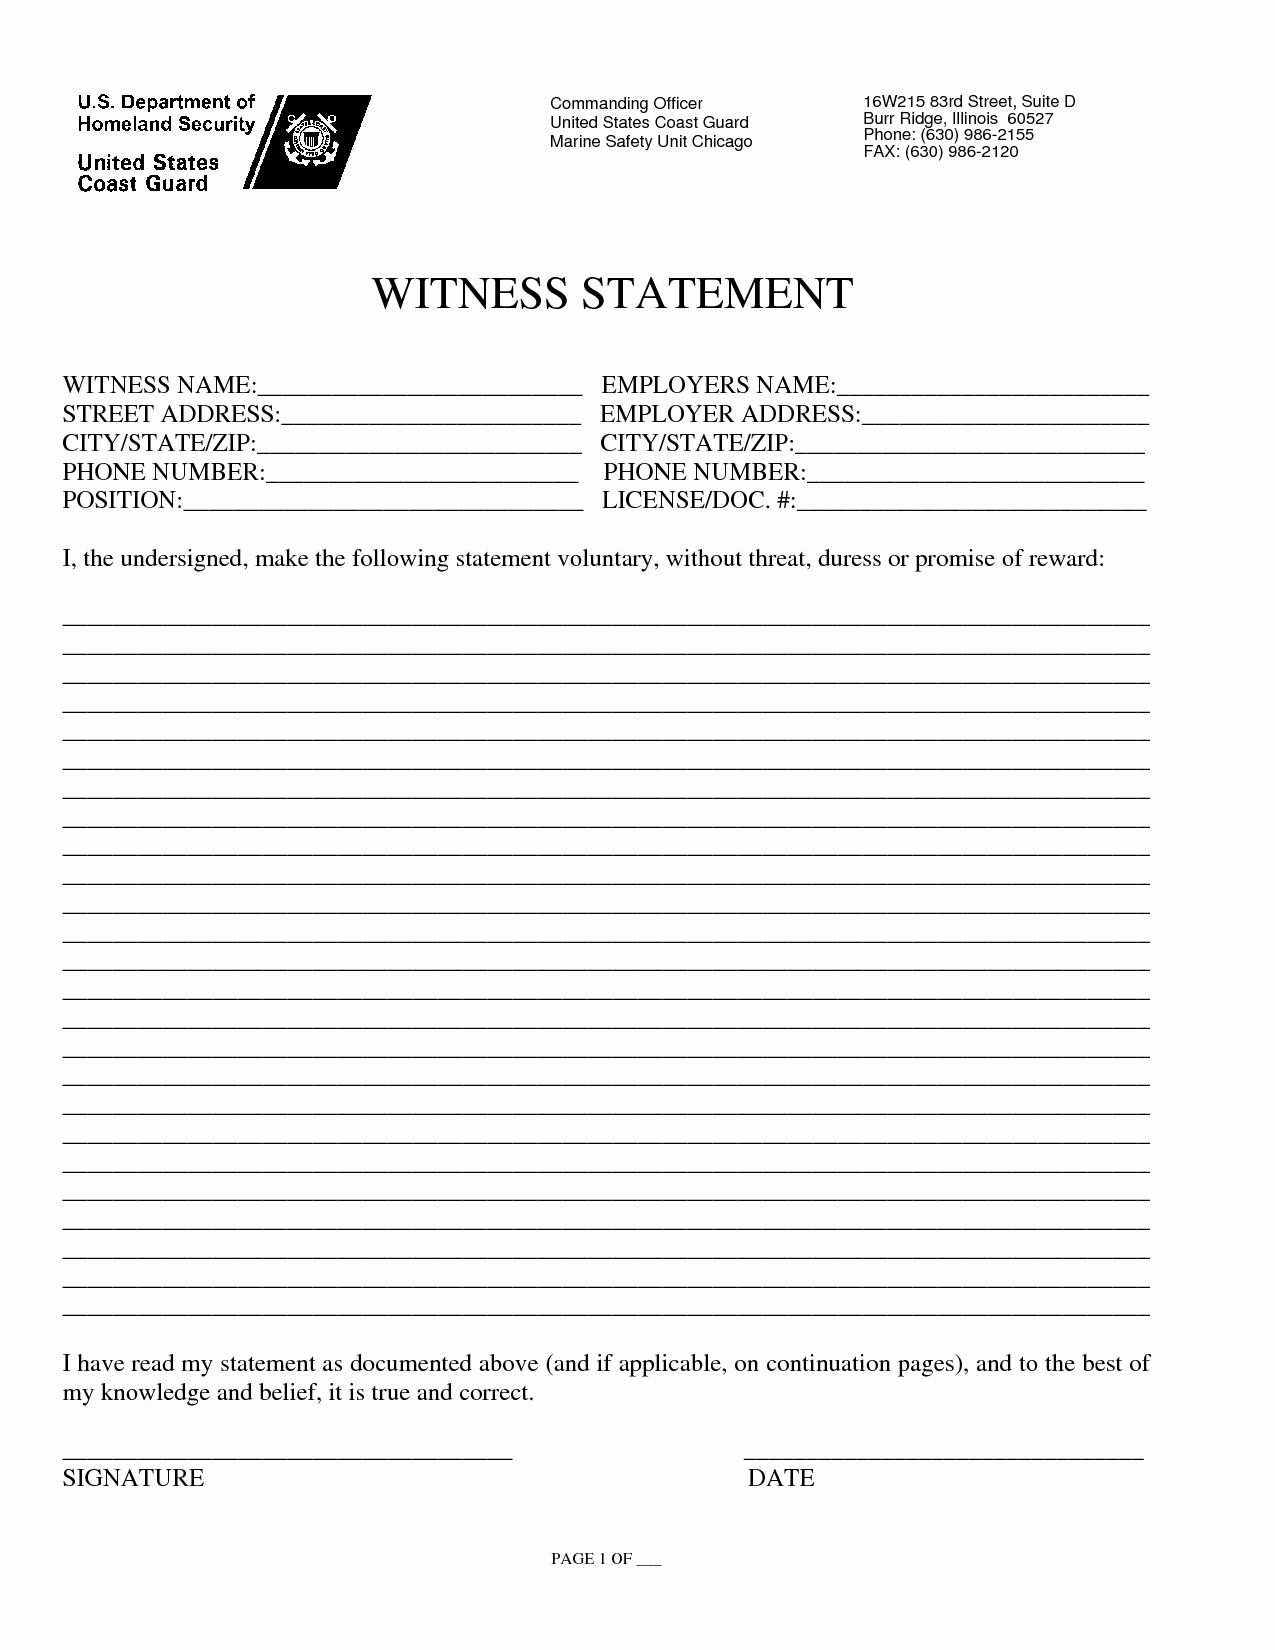 Witness Statement form Template Best Of Index Of Cdn 3 1994 710